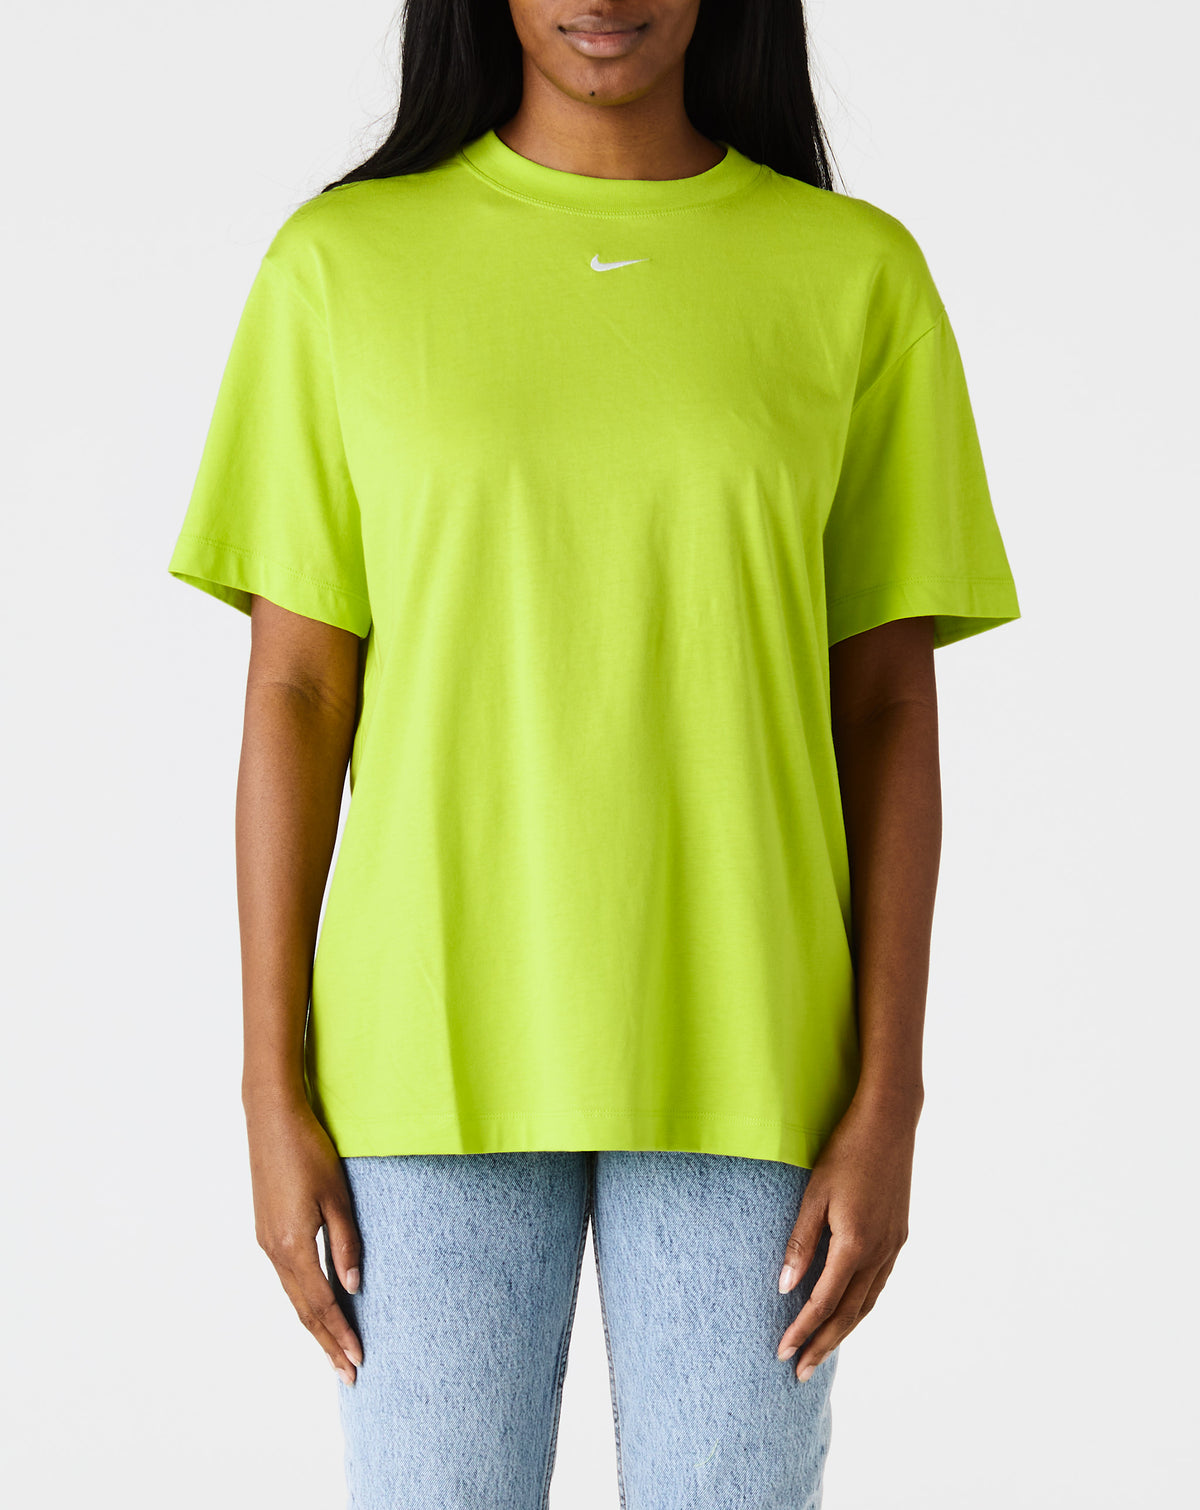 Nike Women's Essential T-Shirt - Rule of Next Apparel